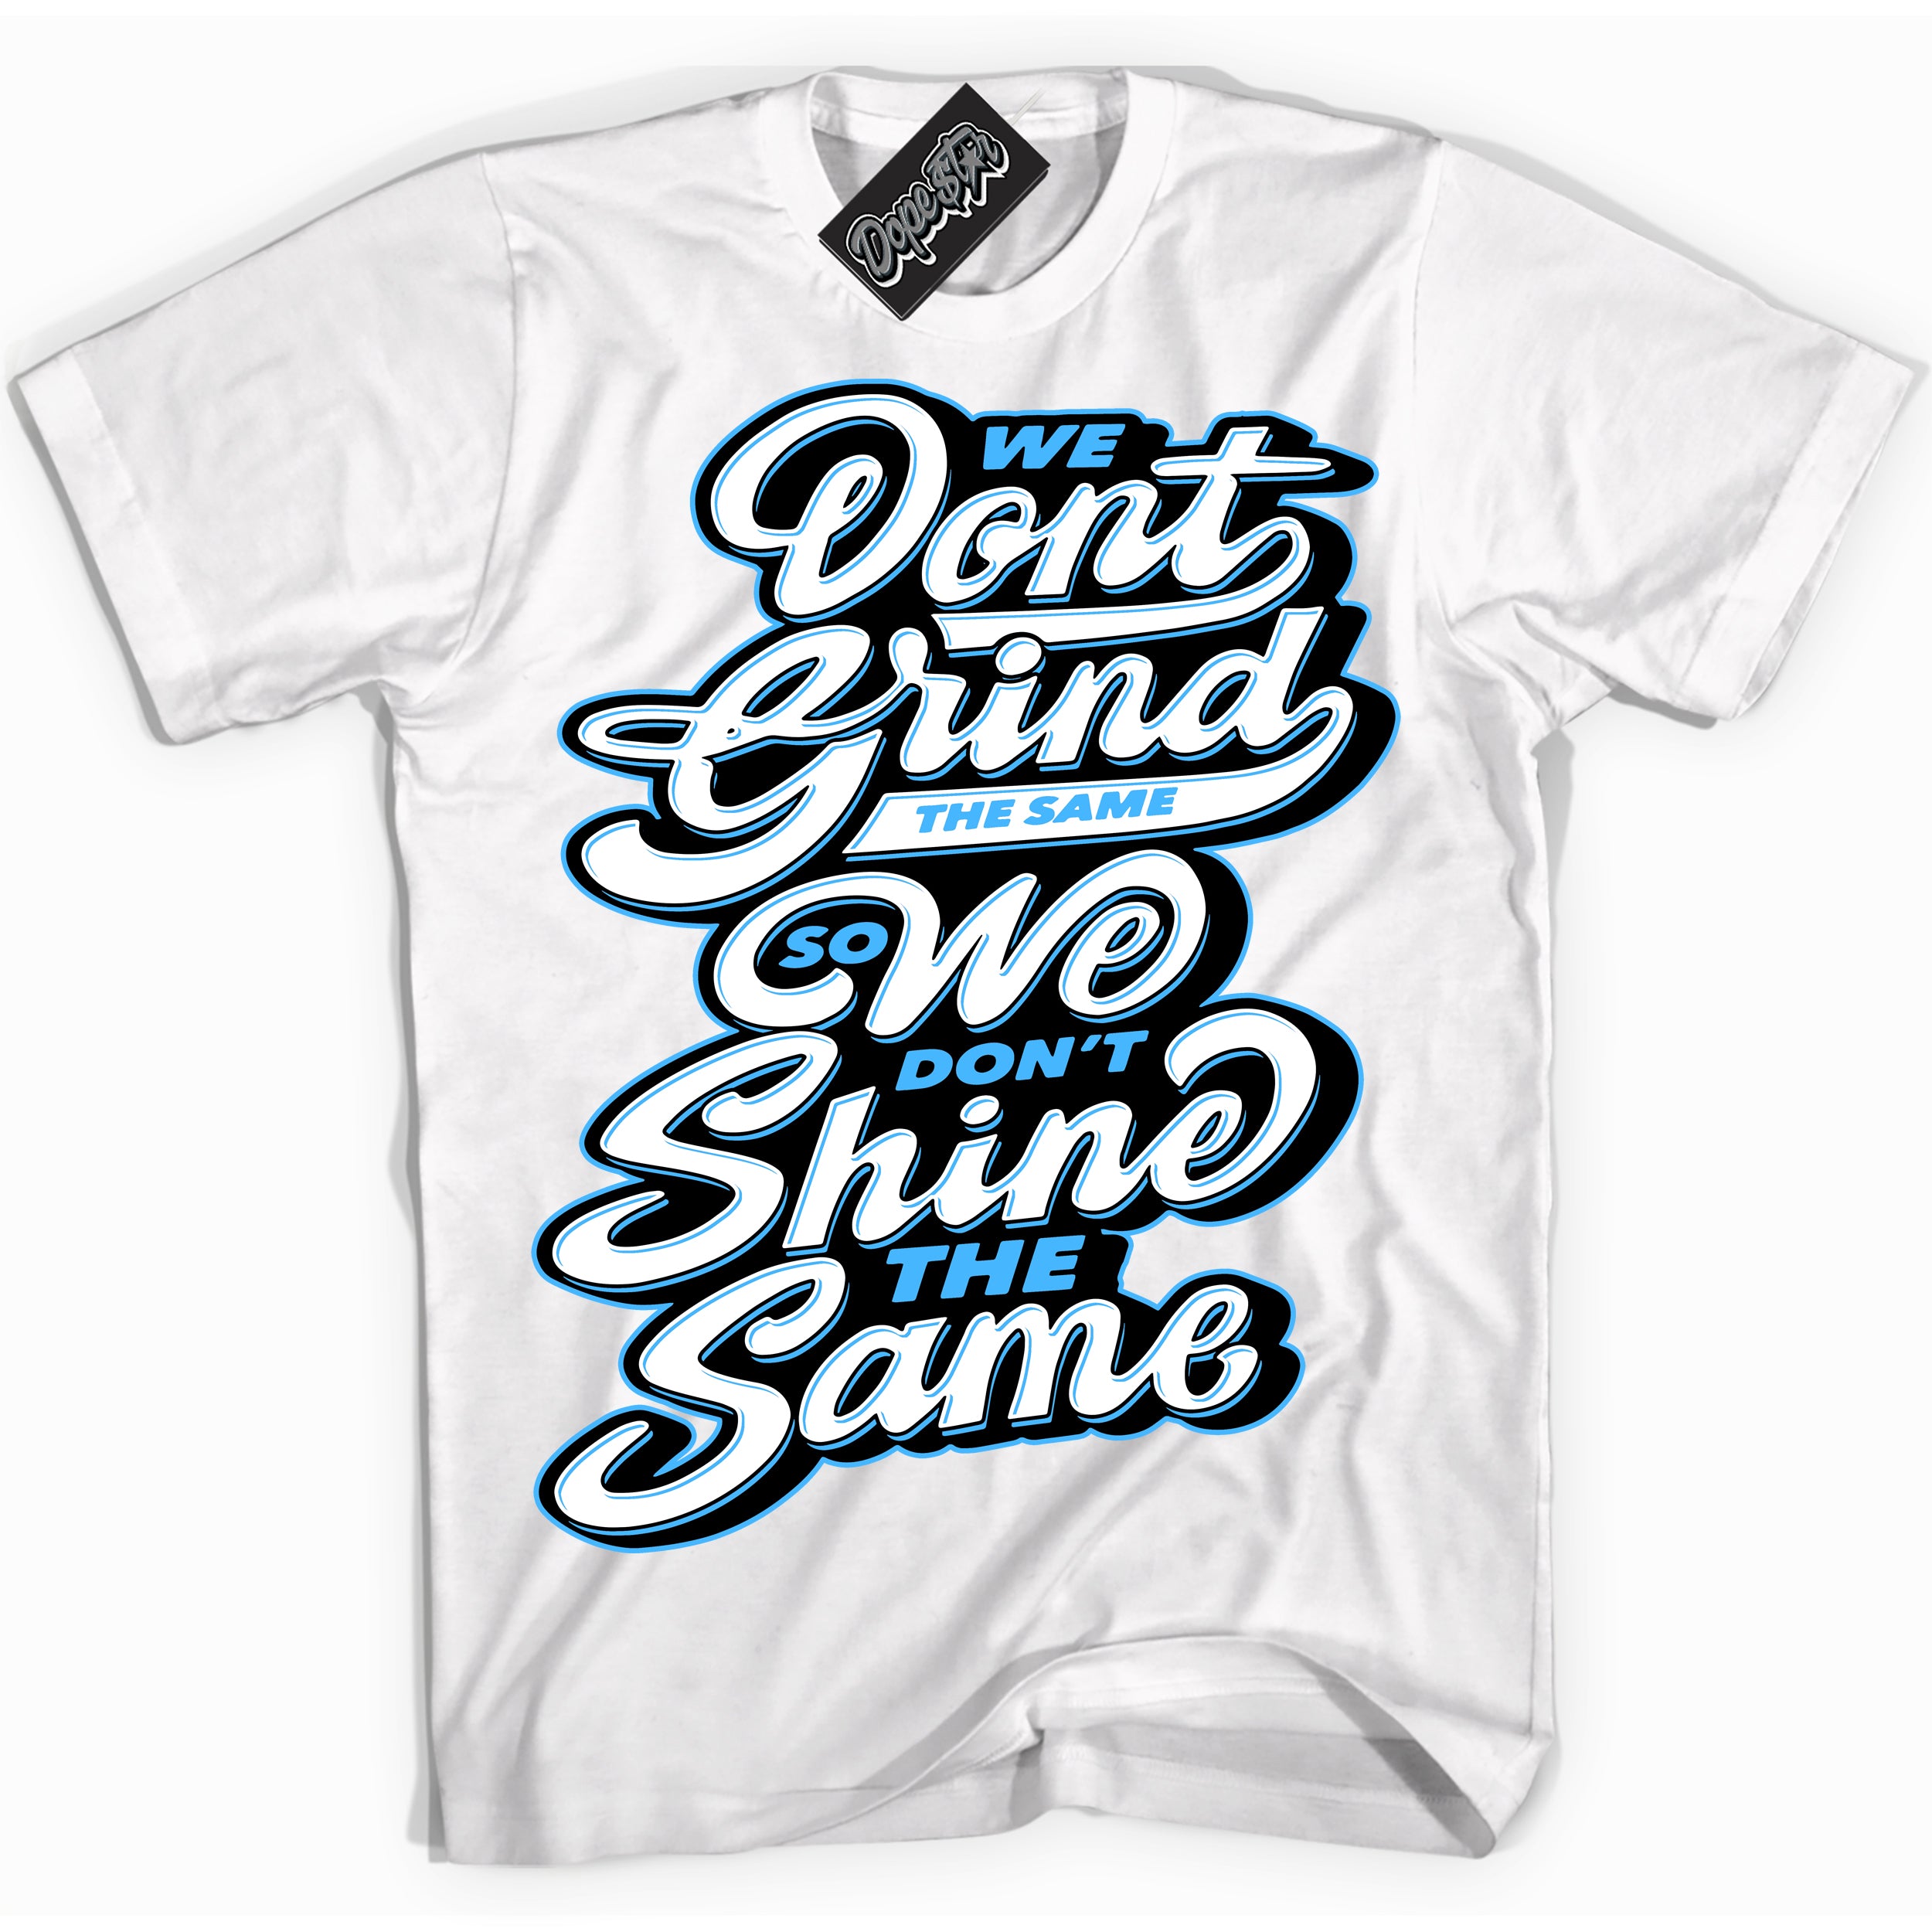 Cool White graphic tee with “ Grind Shine ” design, that perfectly matches Powder Blue 9s sneakers 